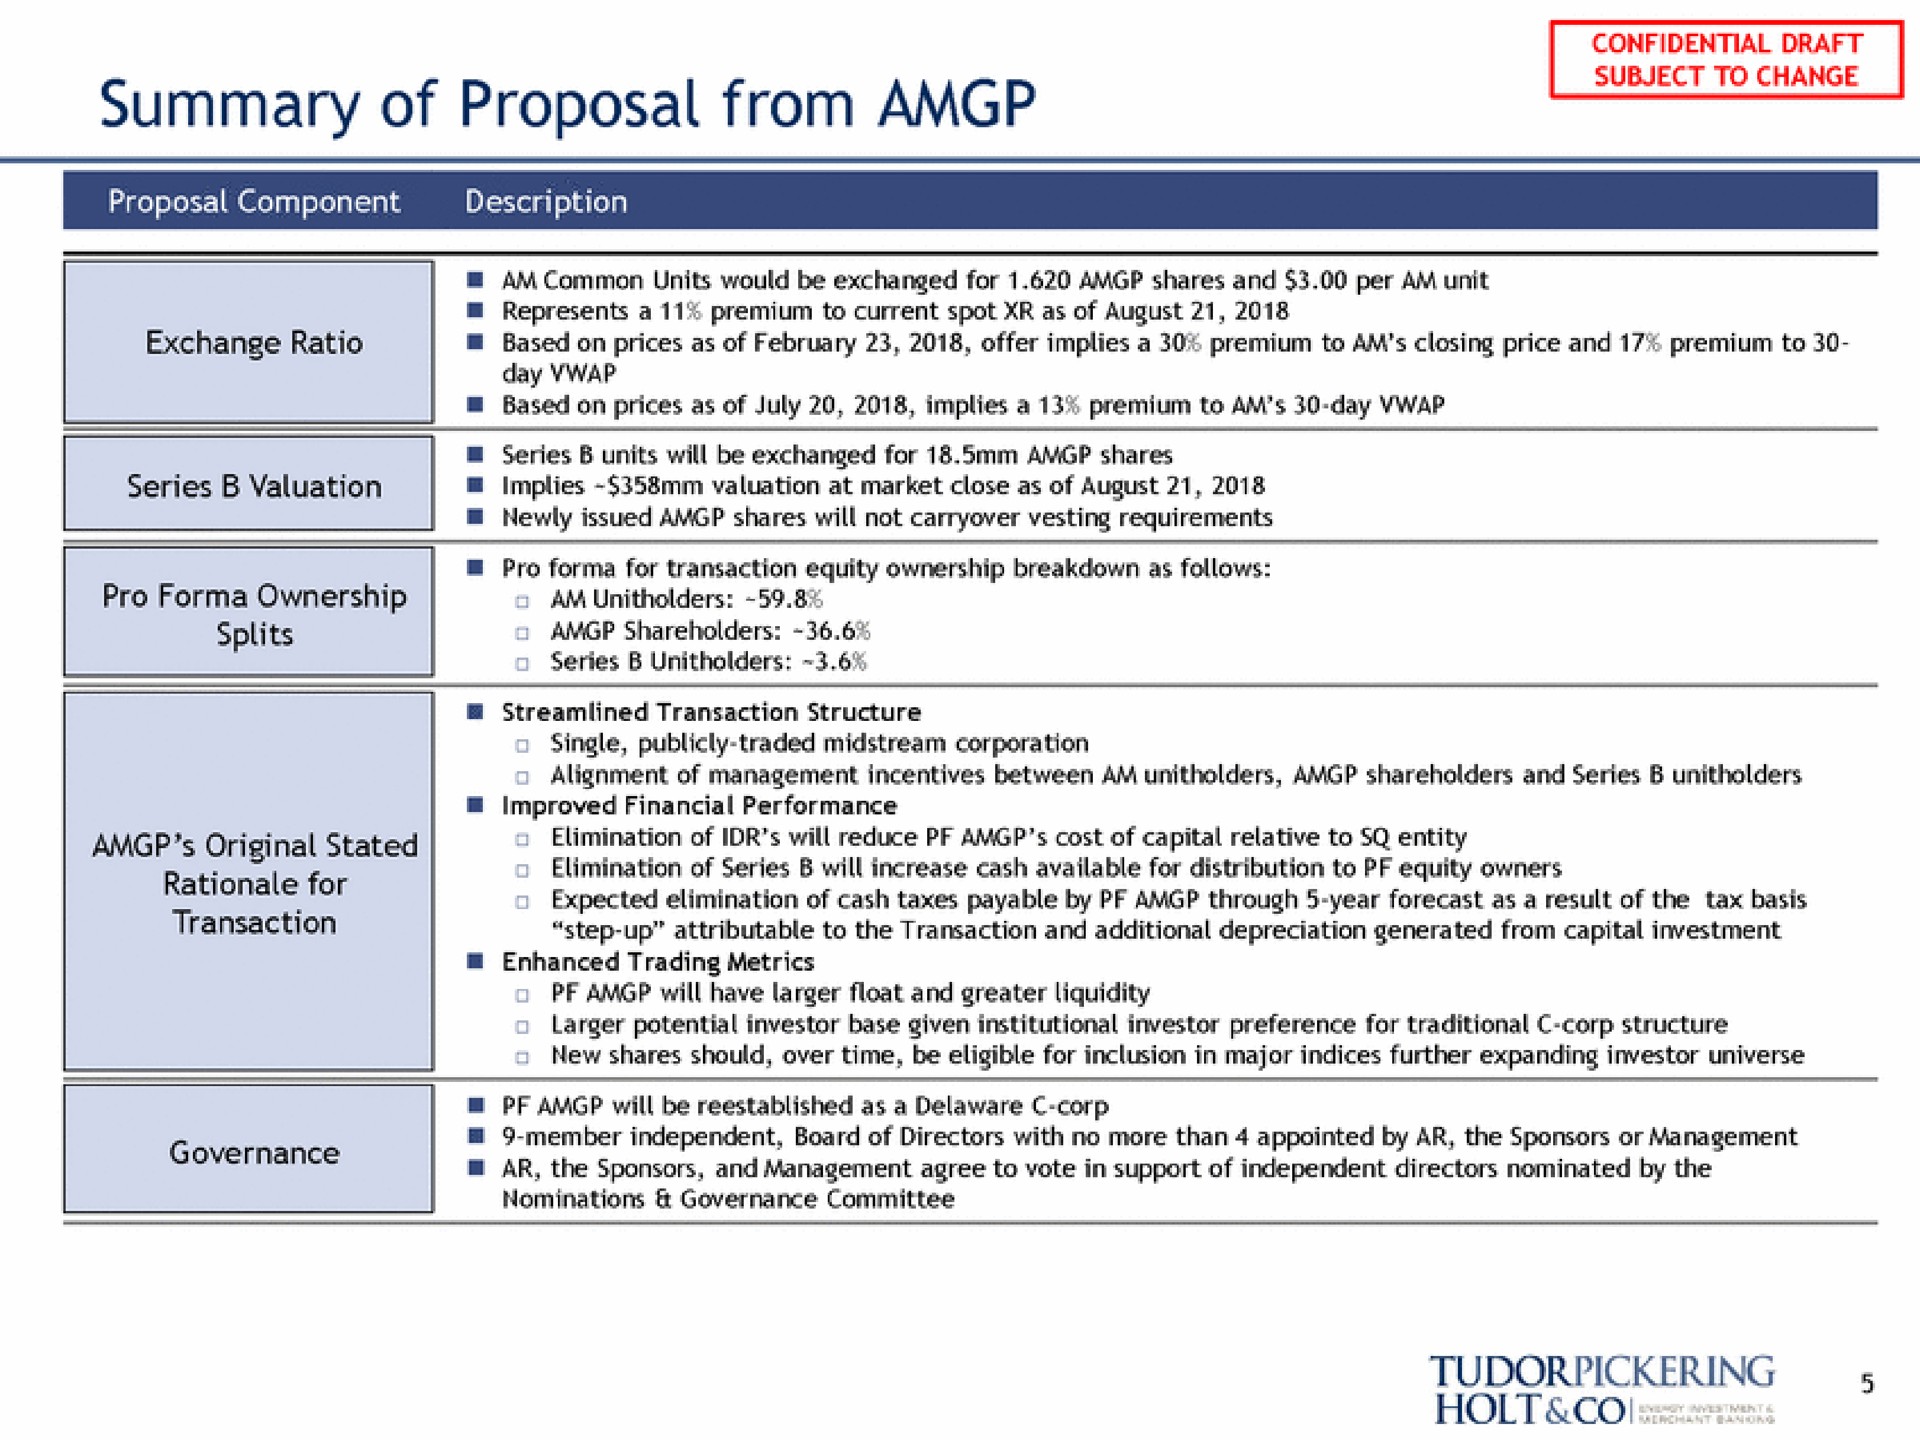 summary of proposal from a holt | Tudor, Pickering, Holt & Co